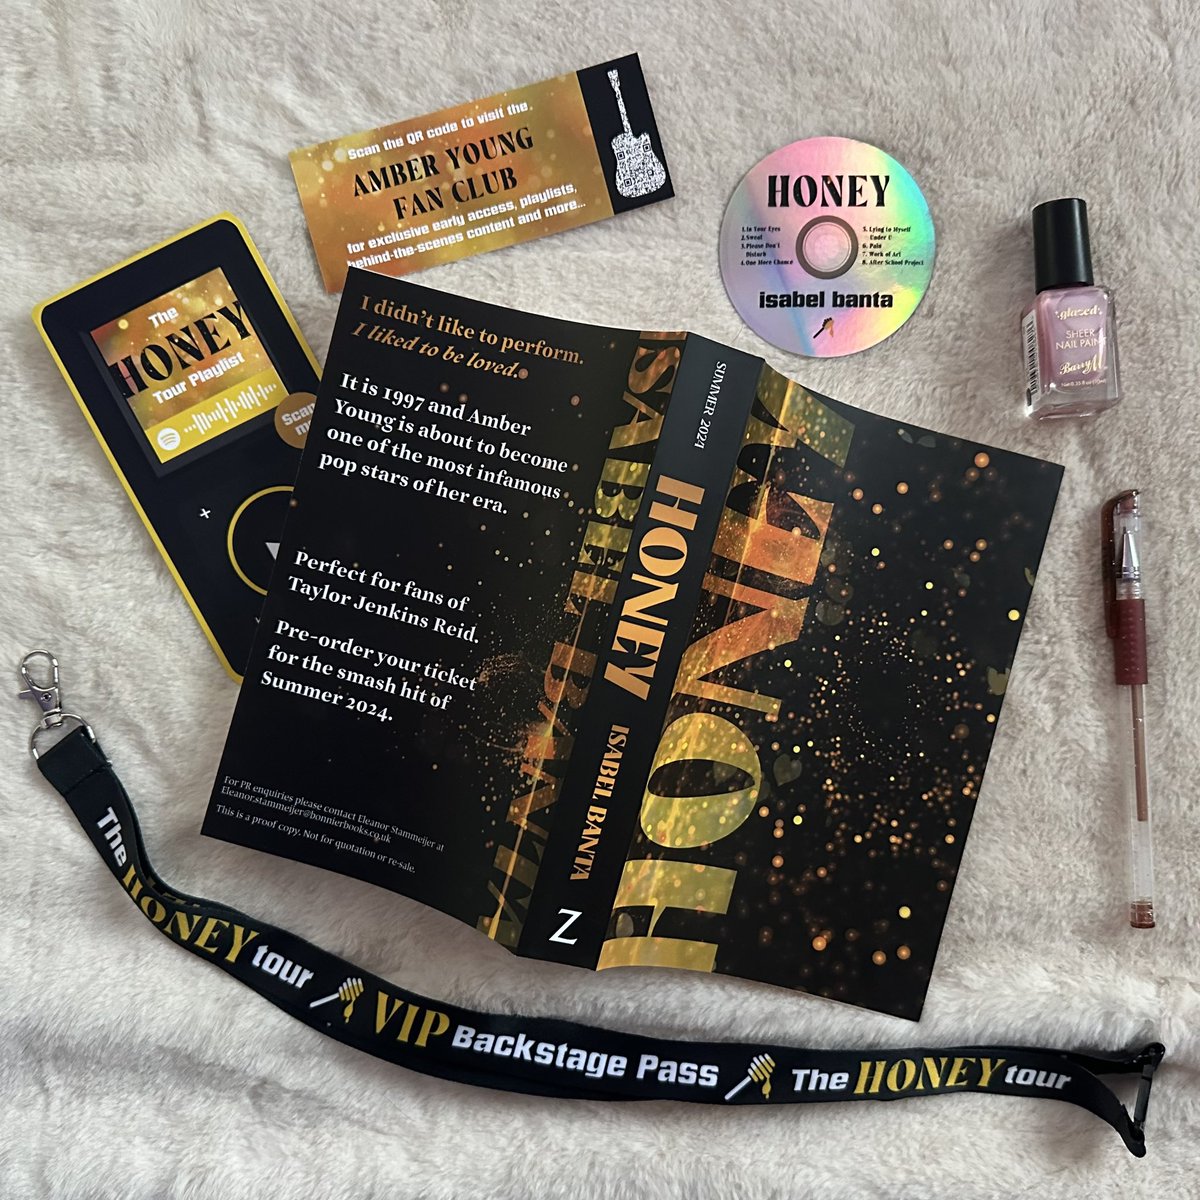 📚📮#BookPost📚📮

What a sparkly fun proof parcel!😍

“🎙️I didn’t like to perform. I liked to be loved❤️”

Looking forward to finding out more about Amber Young in #Honey by #IsabelBanta 

Thank you to @ElliePilcher95 @ElStammeijer @bonnierbooks_uk for sending📚

#BookTwitter